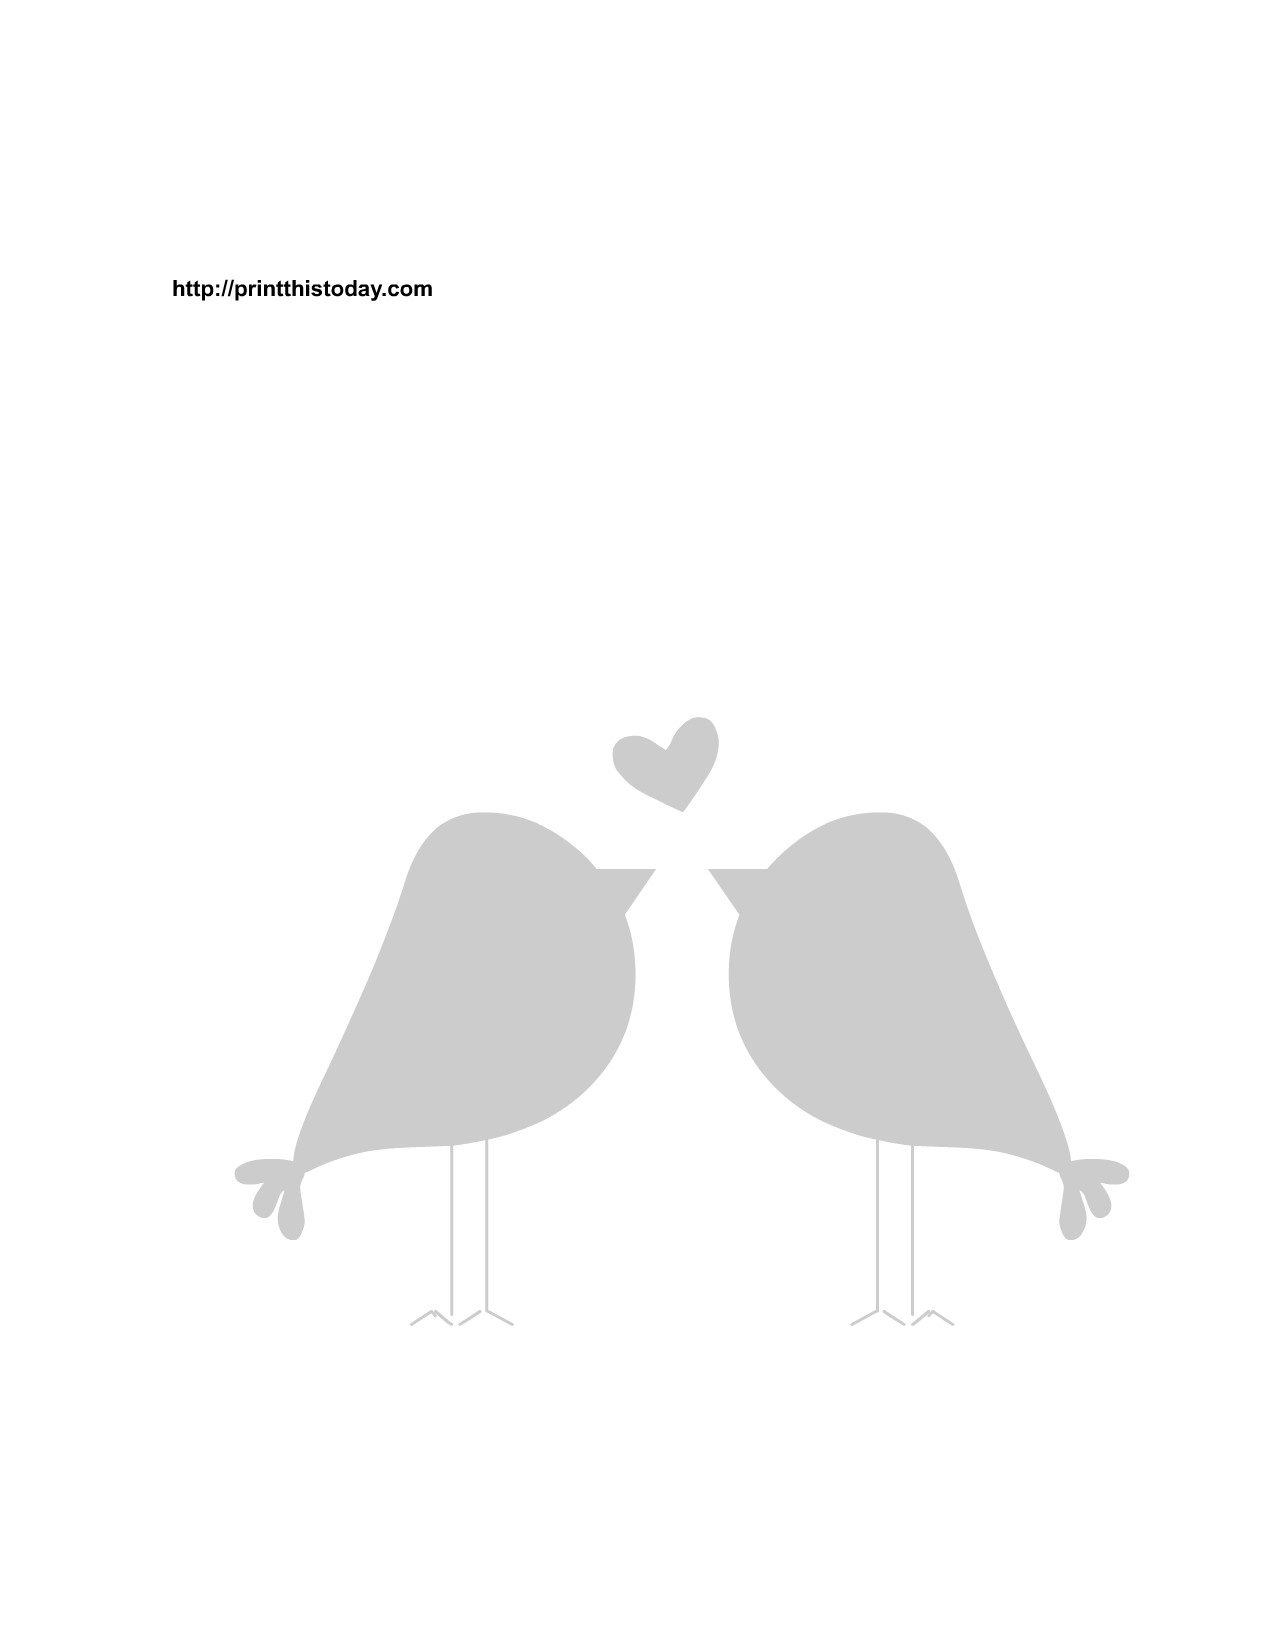 Love Birds Graphic Free Cliparts That You Can Download To You